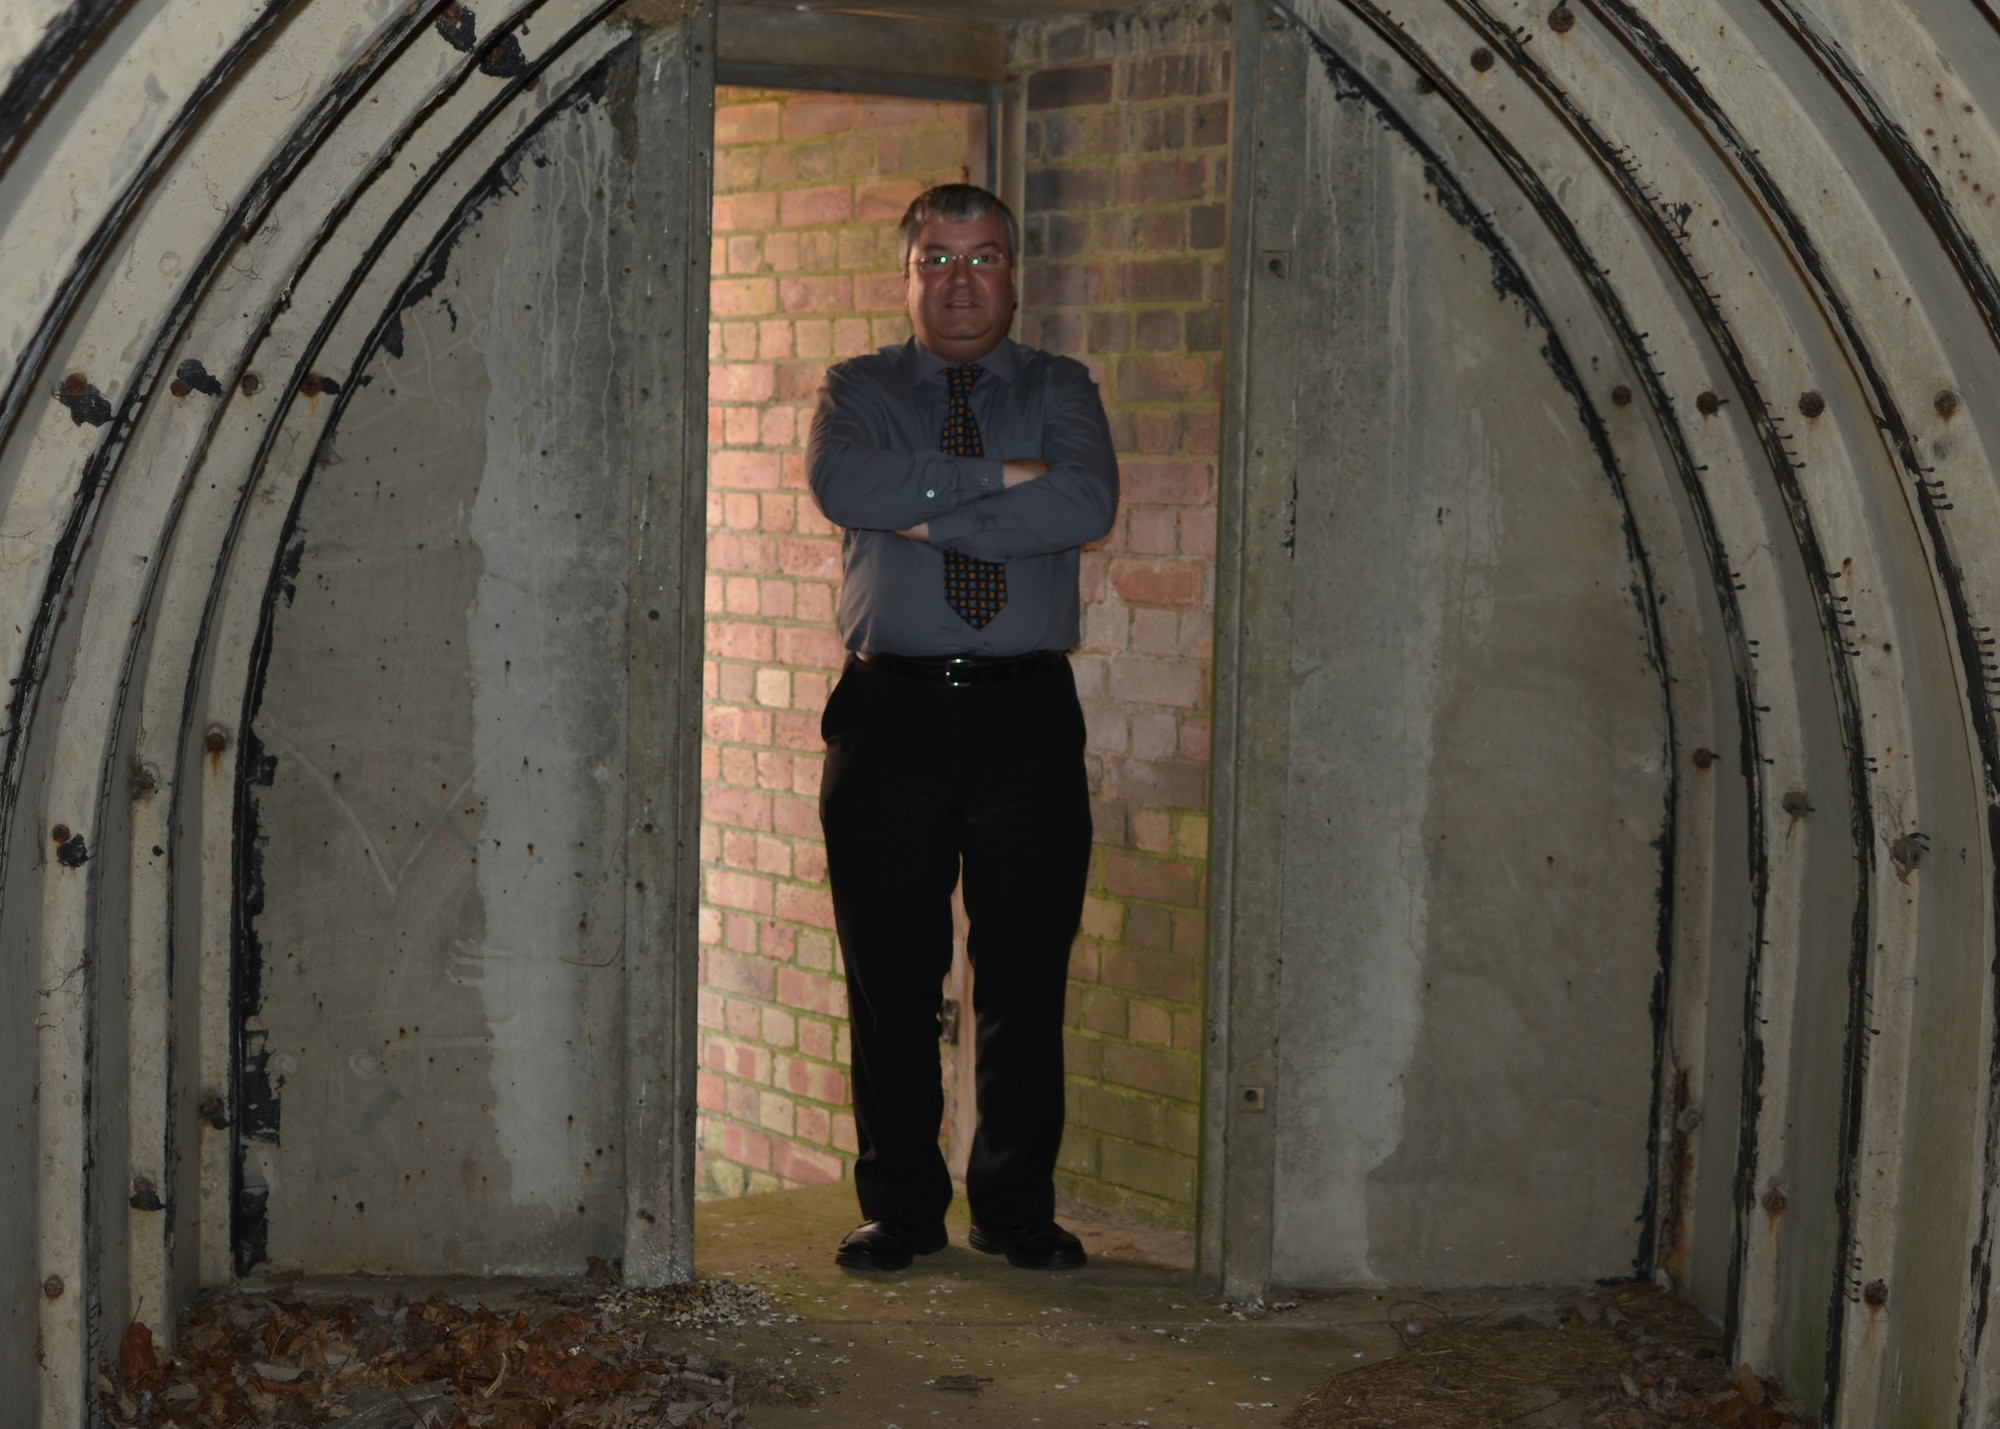 RAF CROUGHTON, United Kingdom - Kevin Bartof stands inside the shelter of one of the World War II fighter pens here. The shelters could hold 25 aircrew and provided shelter during Nazi air raids. (U.S. Air Force photo by Senior Airman Joel Mease)